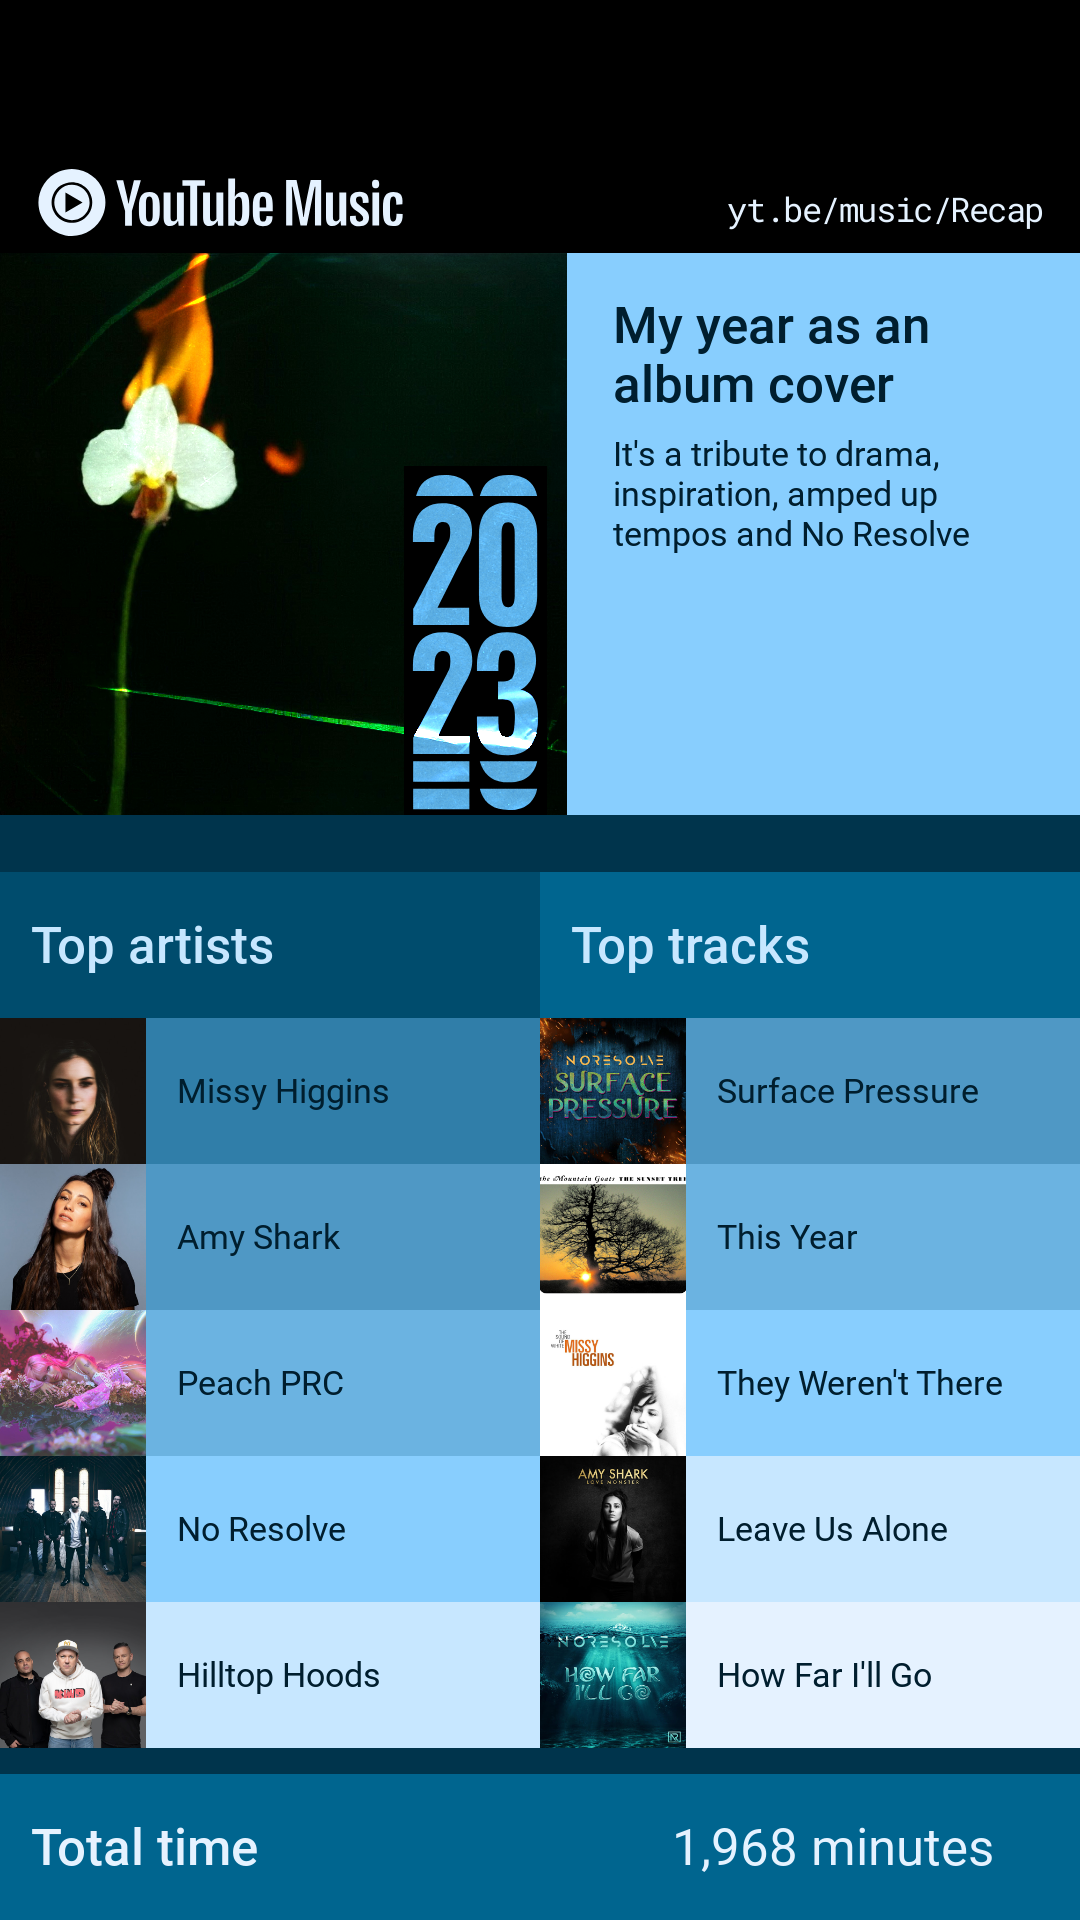 Ash's Top tracks were No Resolve's cover of Surface Pressure from Encanto, This Year by the Mountain Goats, They Weren't There by Missy Higgins, Leave Us Alone by Amy Shark, and No Resolve's cover of How Far I'll Go from Moana. Her top artists were Missy Higgins, Amy Shark, Peach PRC, No Resolve, and Hilltop Hoods 